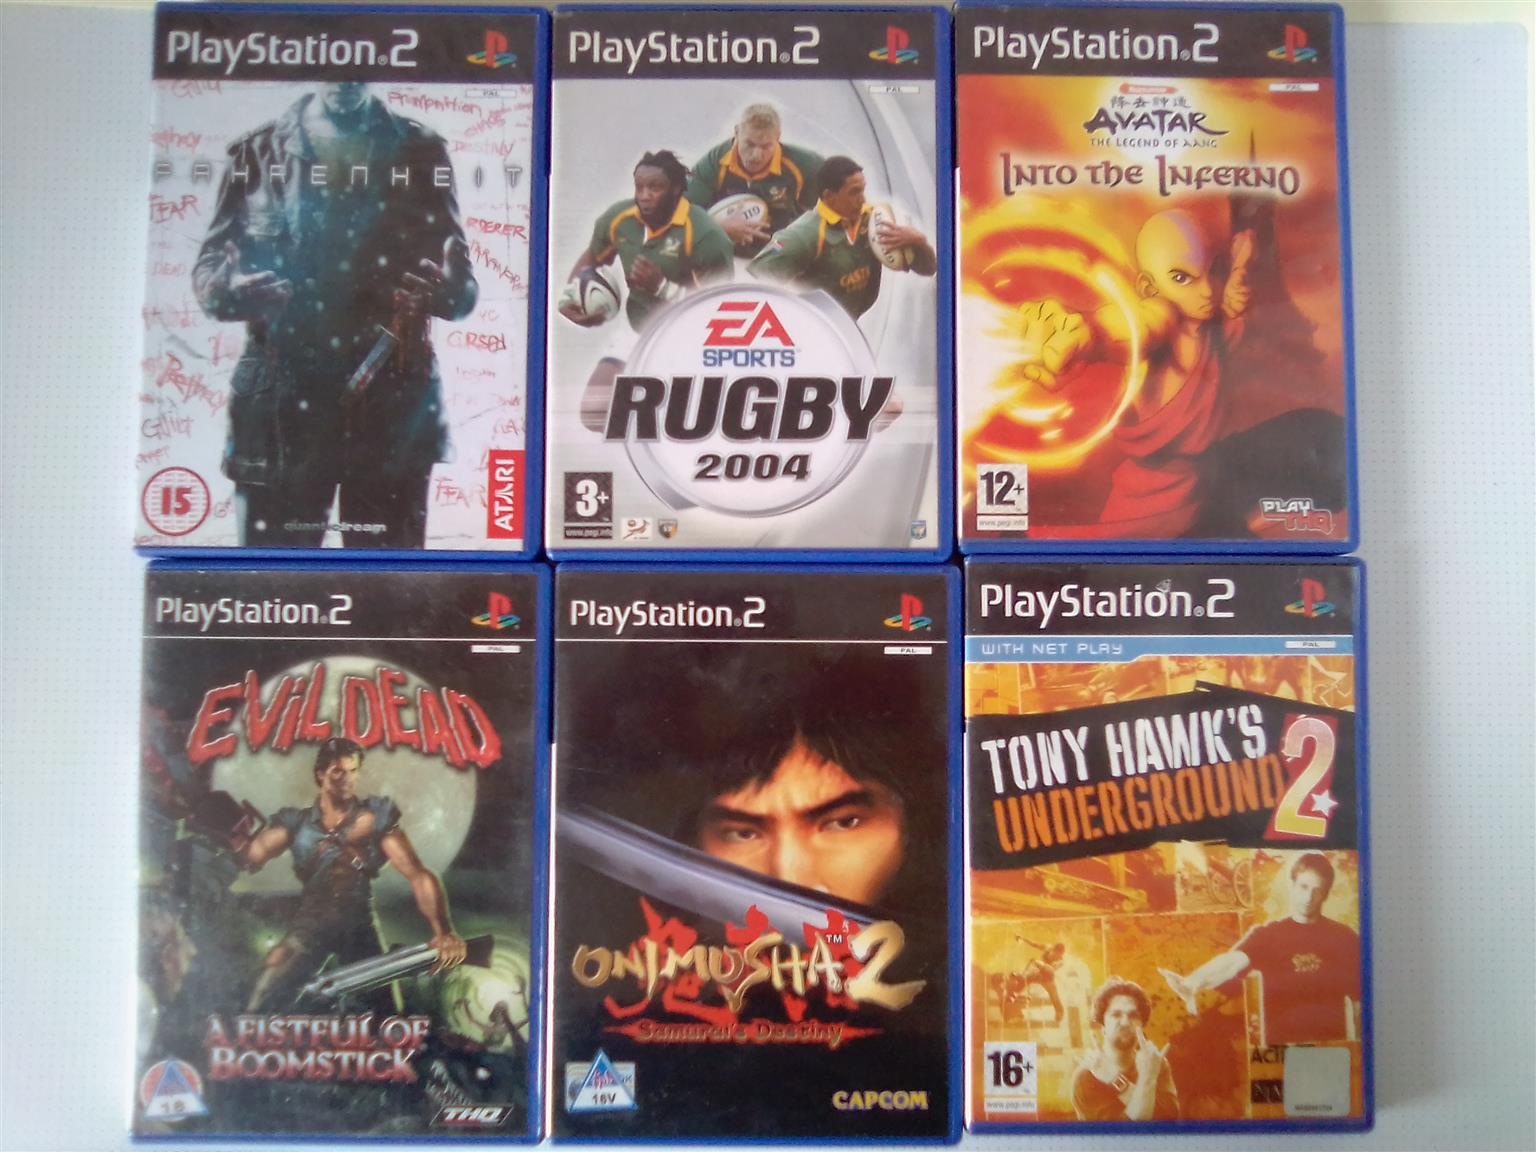 the first ps2 game